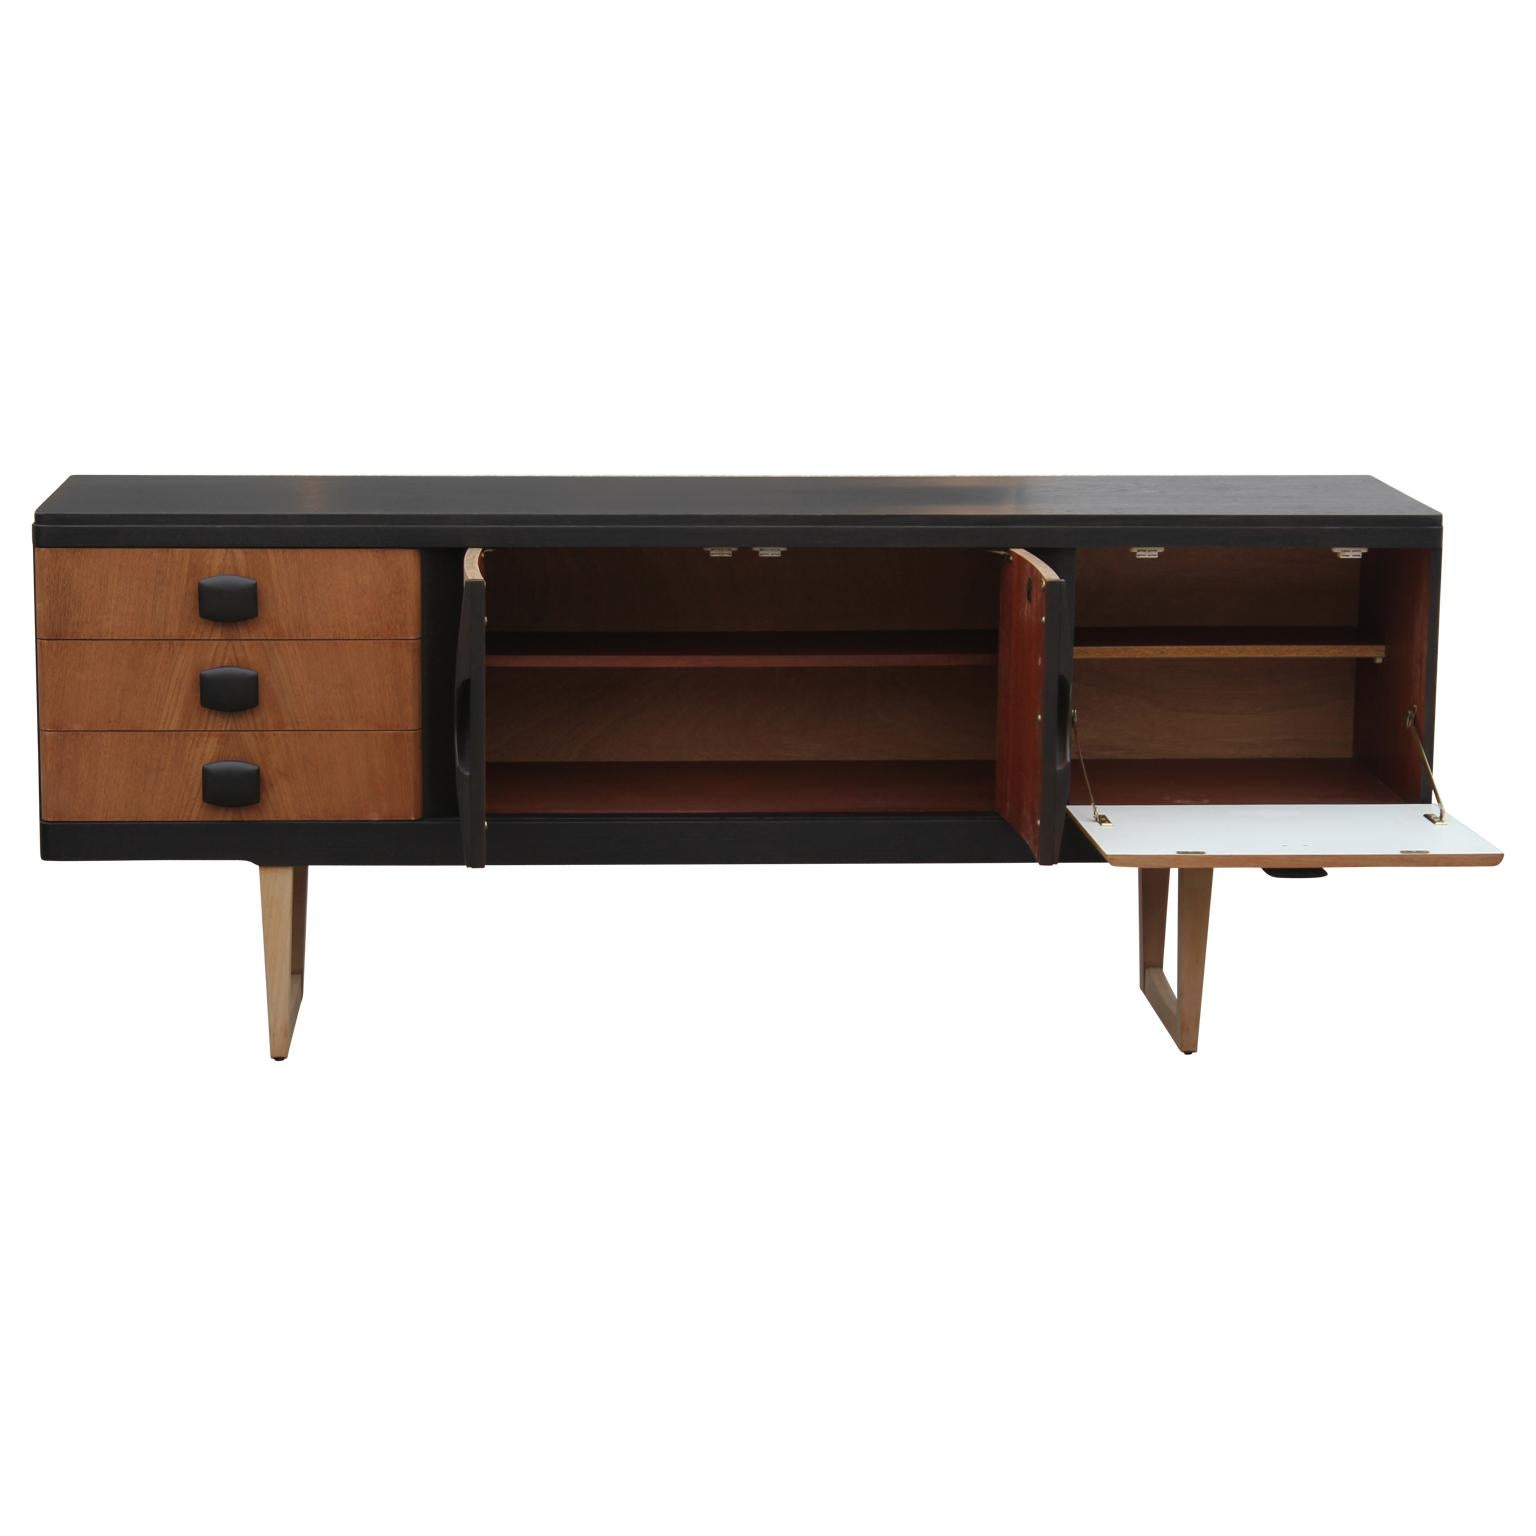 Mid-20th Century Modern Restored Two-Tone Danish Style Teak Credenza or Sideboard